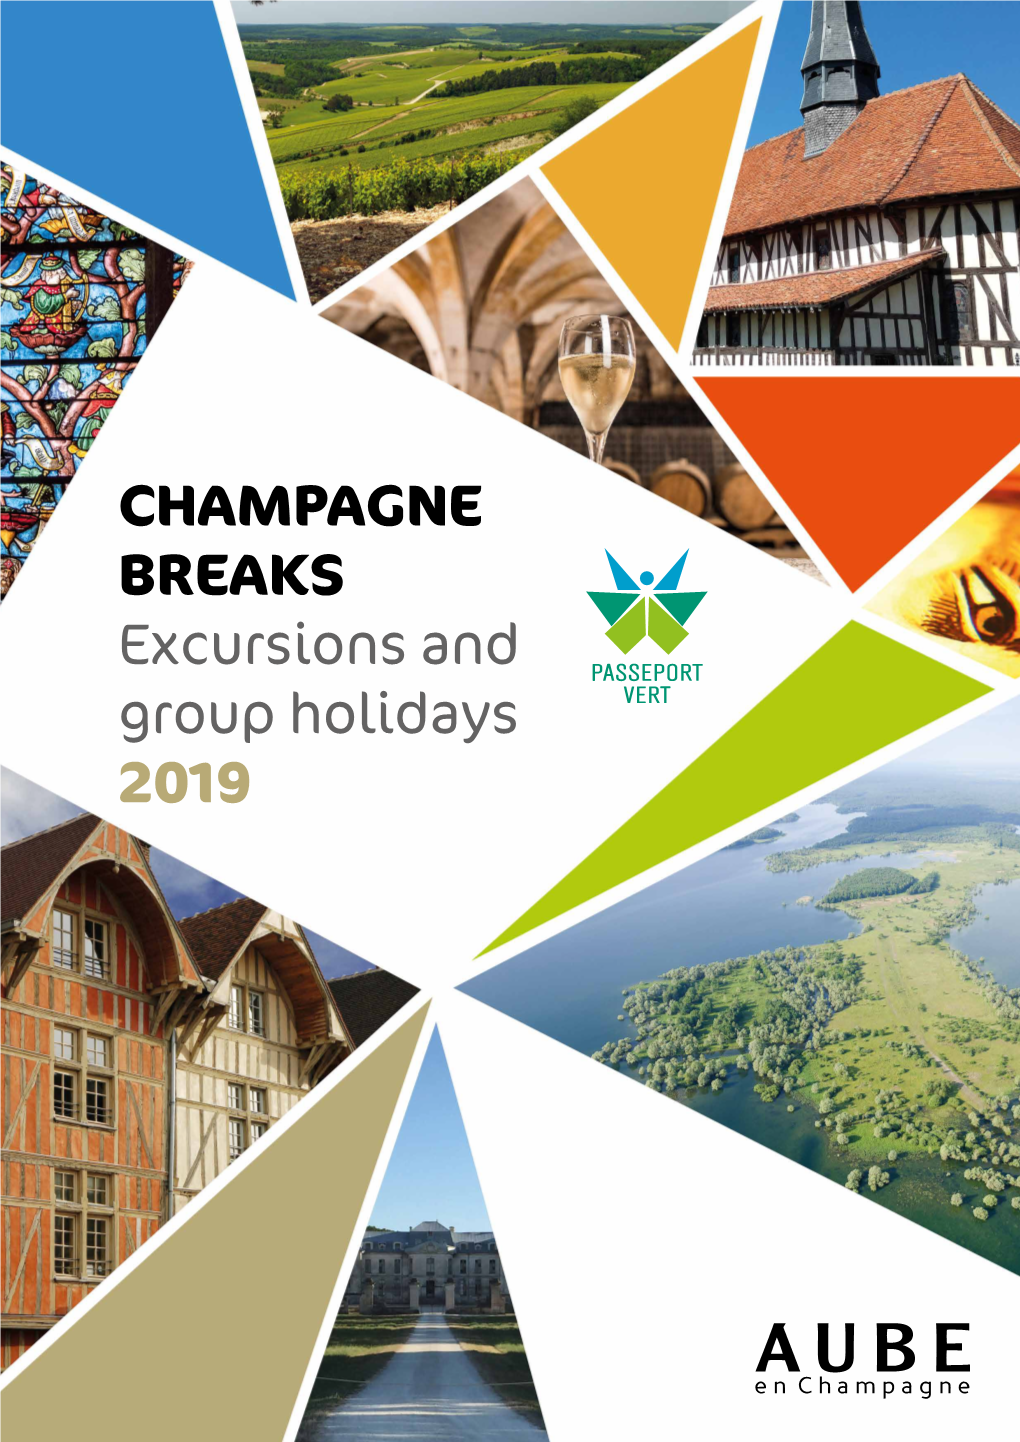 CHAMPAGNE BREAKS Excursions and Group Holidays 2019 Contents